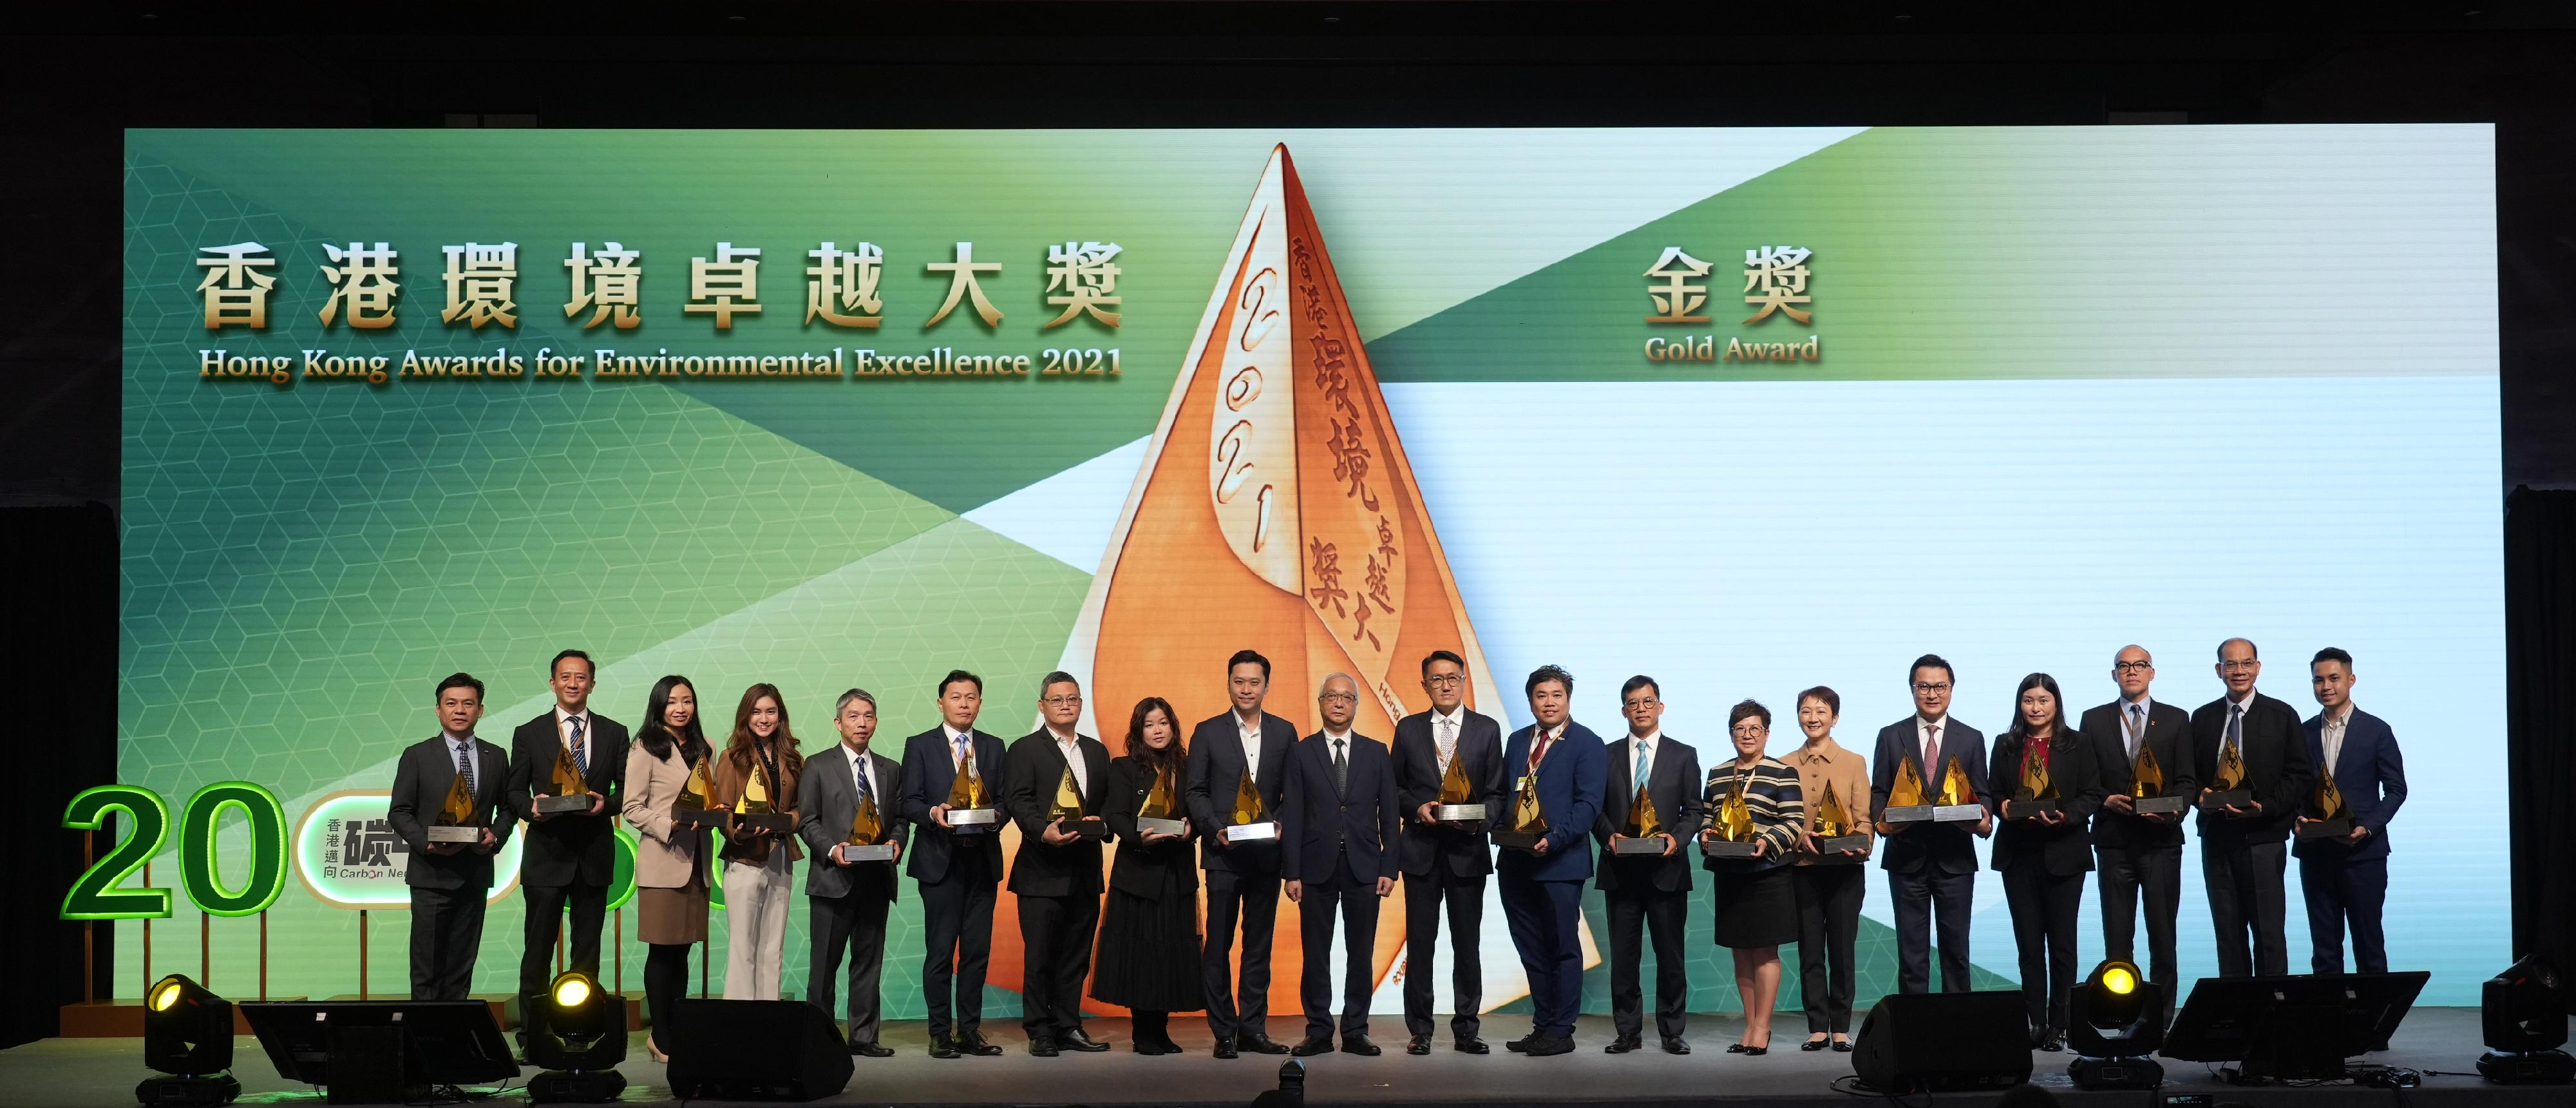 The Secretary for Environment and Ecology, Mr Tse Chin-wan (tenth left), is pictured with representatives of winning companies and organisations of the Gold Award of the Hong Kong Awards for Environmental Excellence and the Hong Kong Green Innovations Awards, at the 2021 Hong Kong Awards for Environmental Excellence and Hong Kong Green Organisation Certification Presentation Ceremony at the Hong Kong Convention and Exhibition Centre today (February 20).